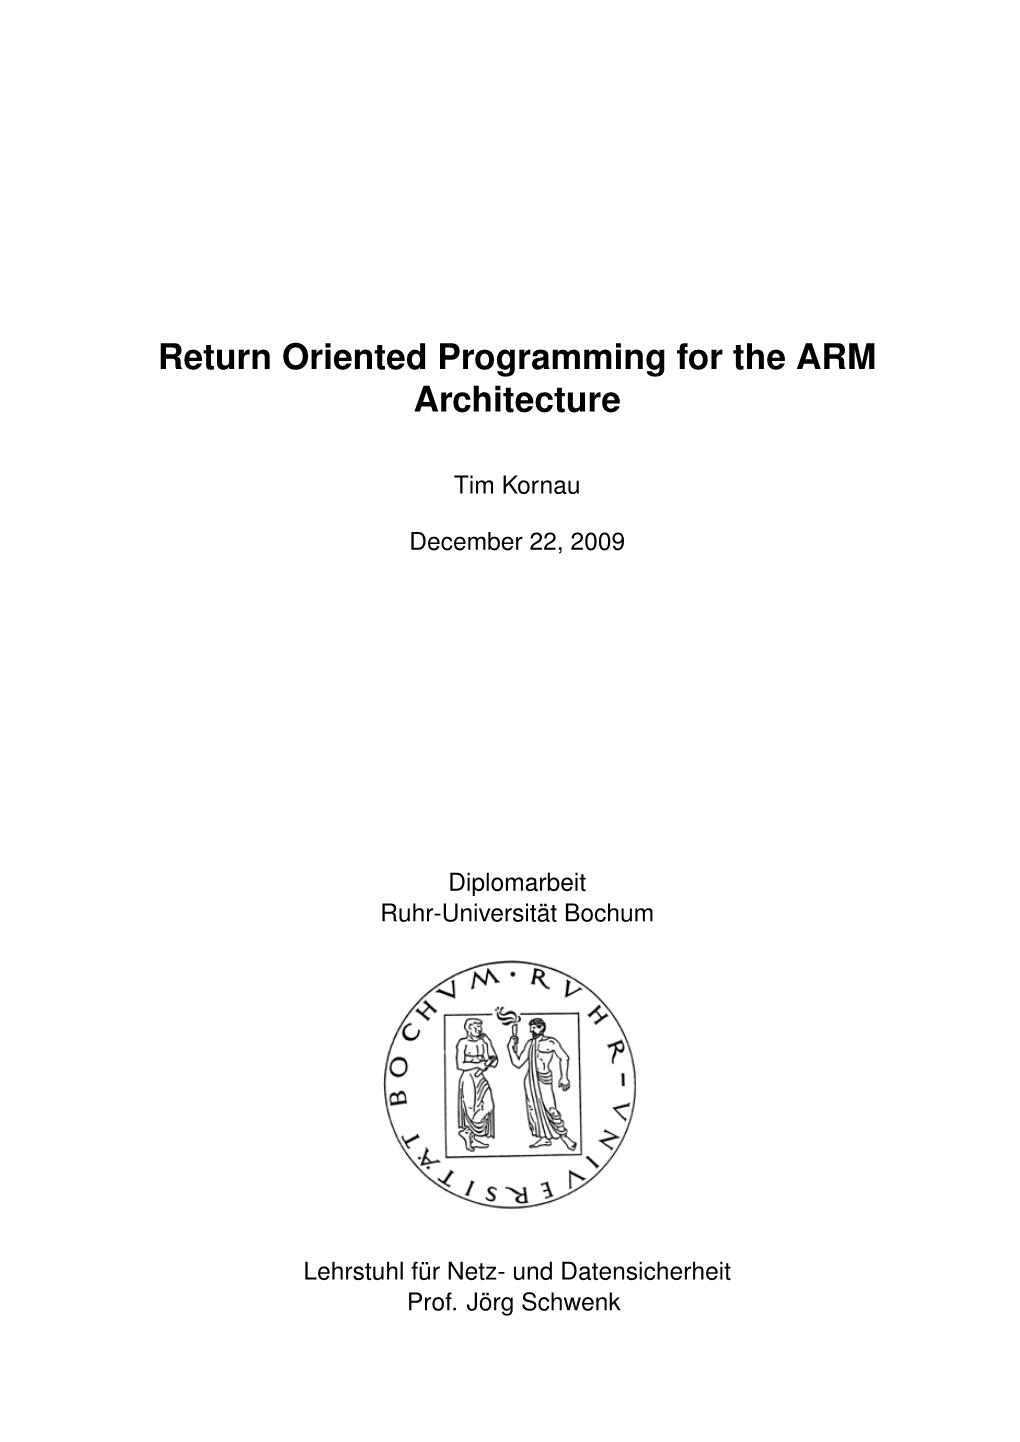 Return Oriented Programming for the ARM Architecture